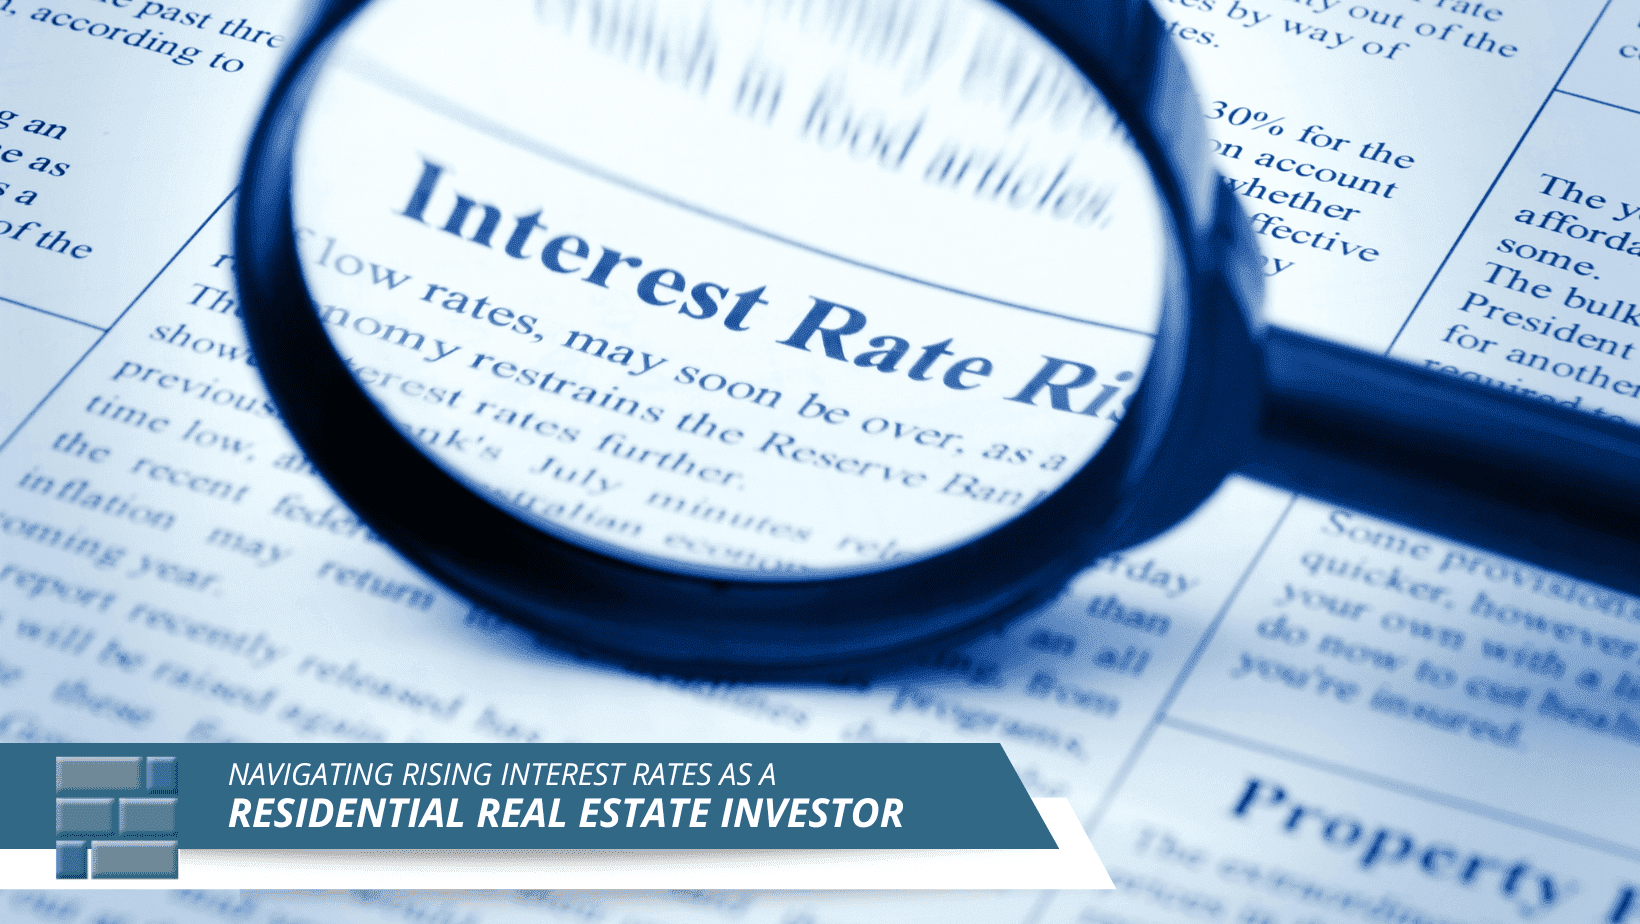 Navigating Rising Interest Rates as a Residential Real Estate Investor